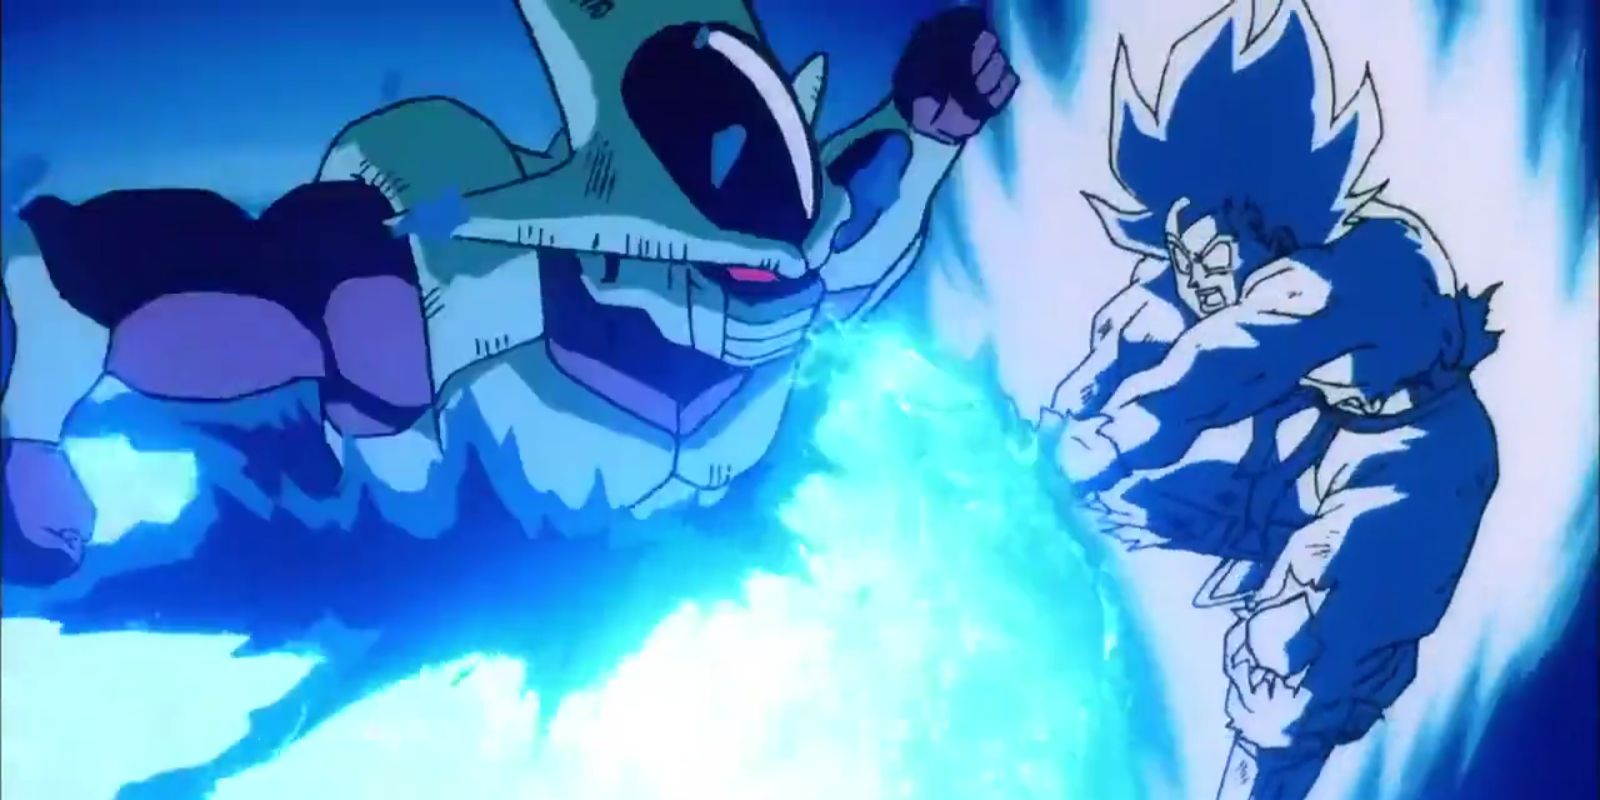 Goku fighting Cooler in his final form in Dragon Ball Z Cooler's Revenge